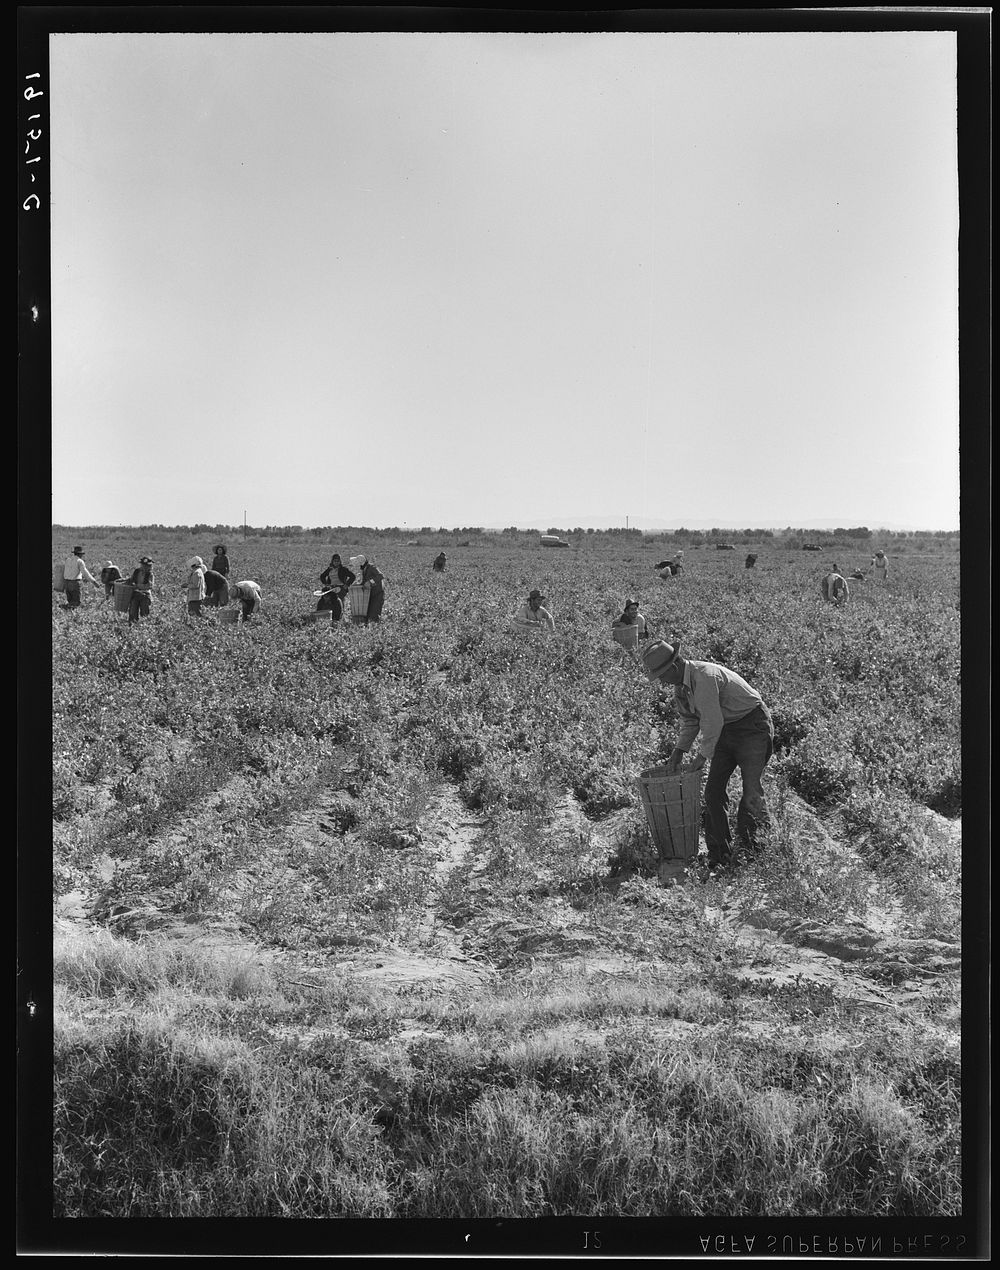 [Untitled photo, possibly related to: Pea pickers near Calipatria, California]. Sourced from the Library of Congress.